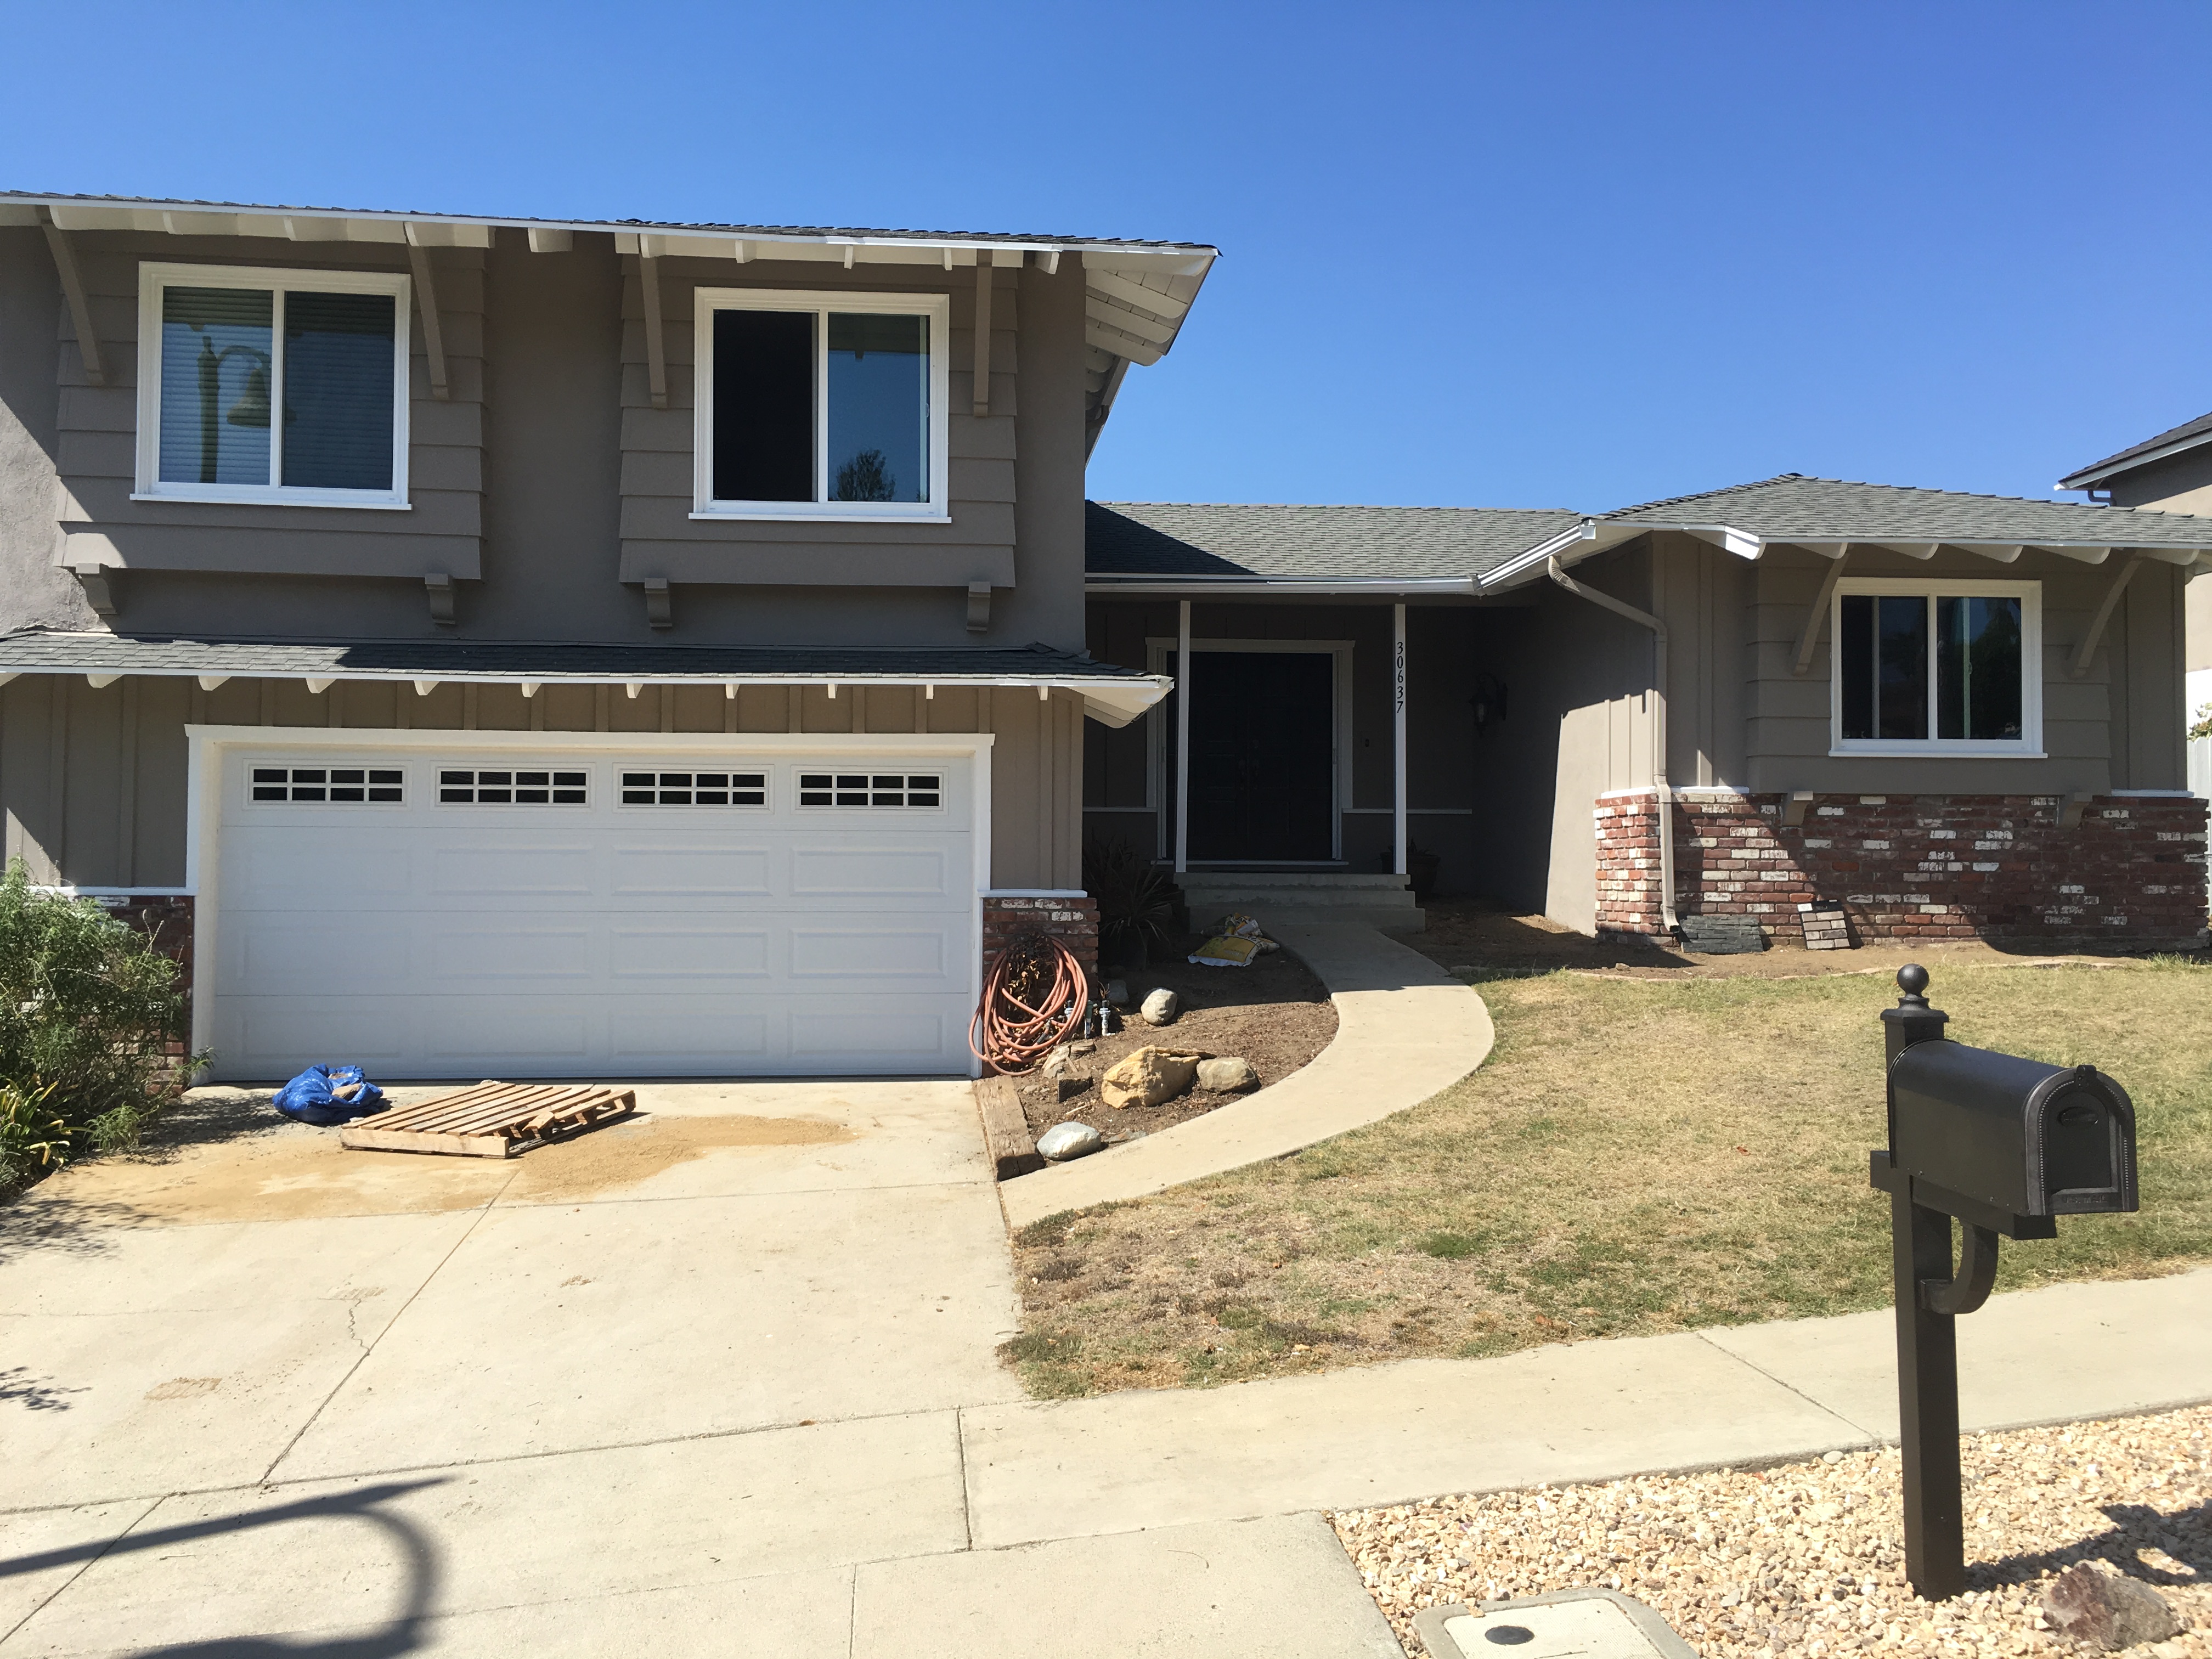 Exterior Painting by CertaPro house painters in Agoura Hills, CA